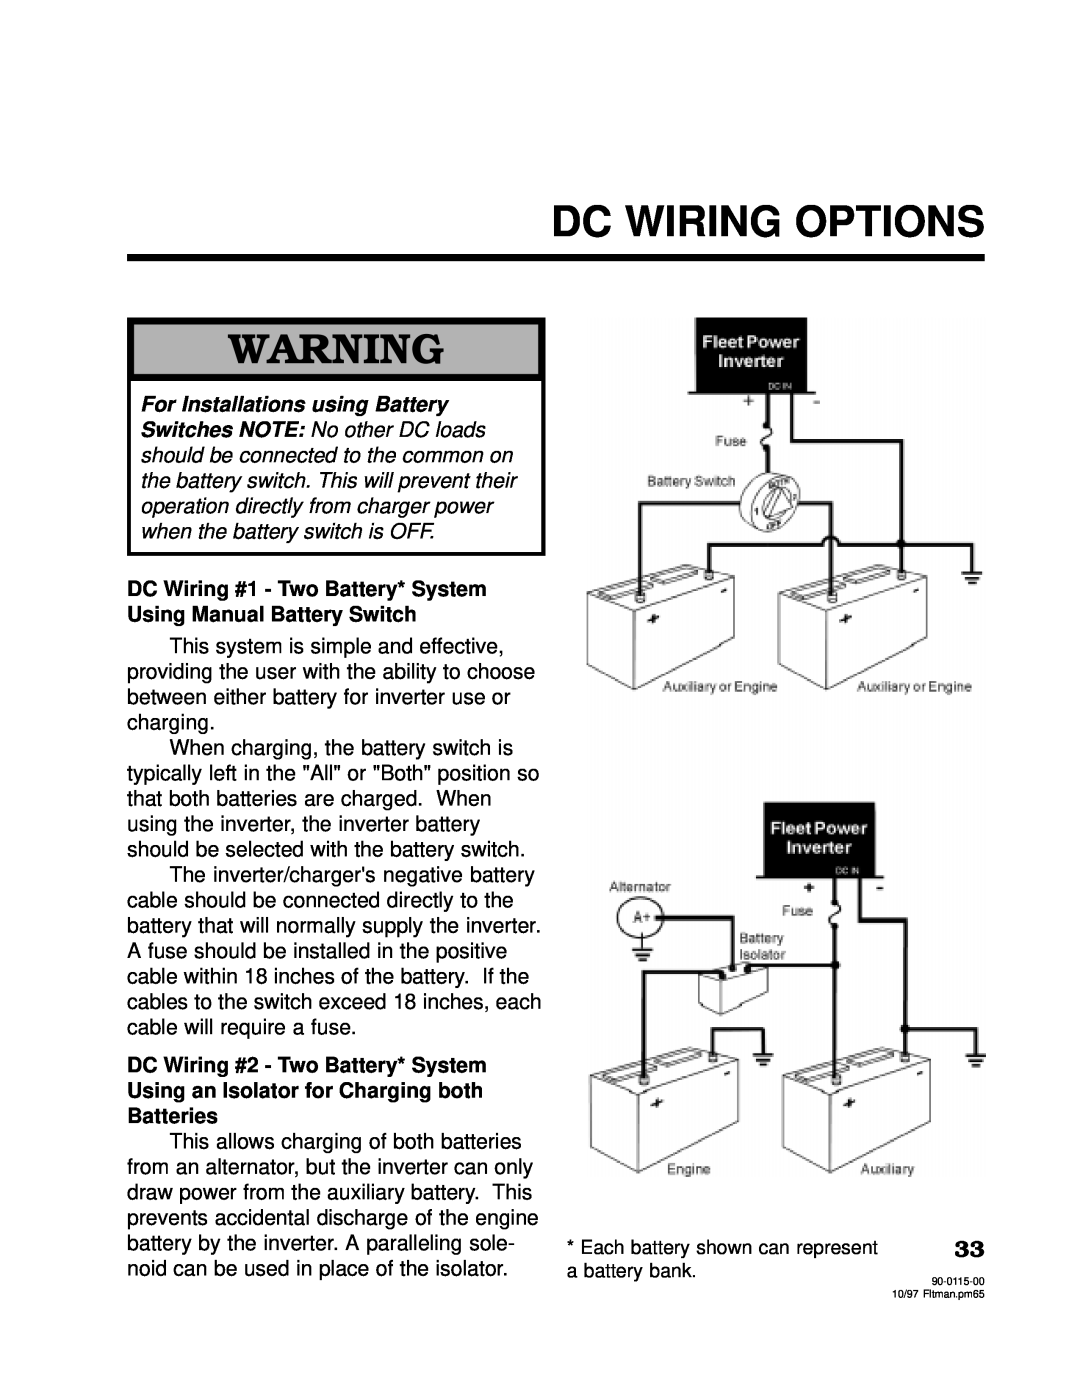 Xantrex Technology 2000 Dc Wiring Options, DC Wiring #1 - Two Battery* System, Using Manual Battery Switch, Batteries 